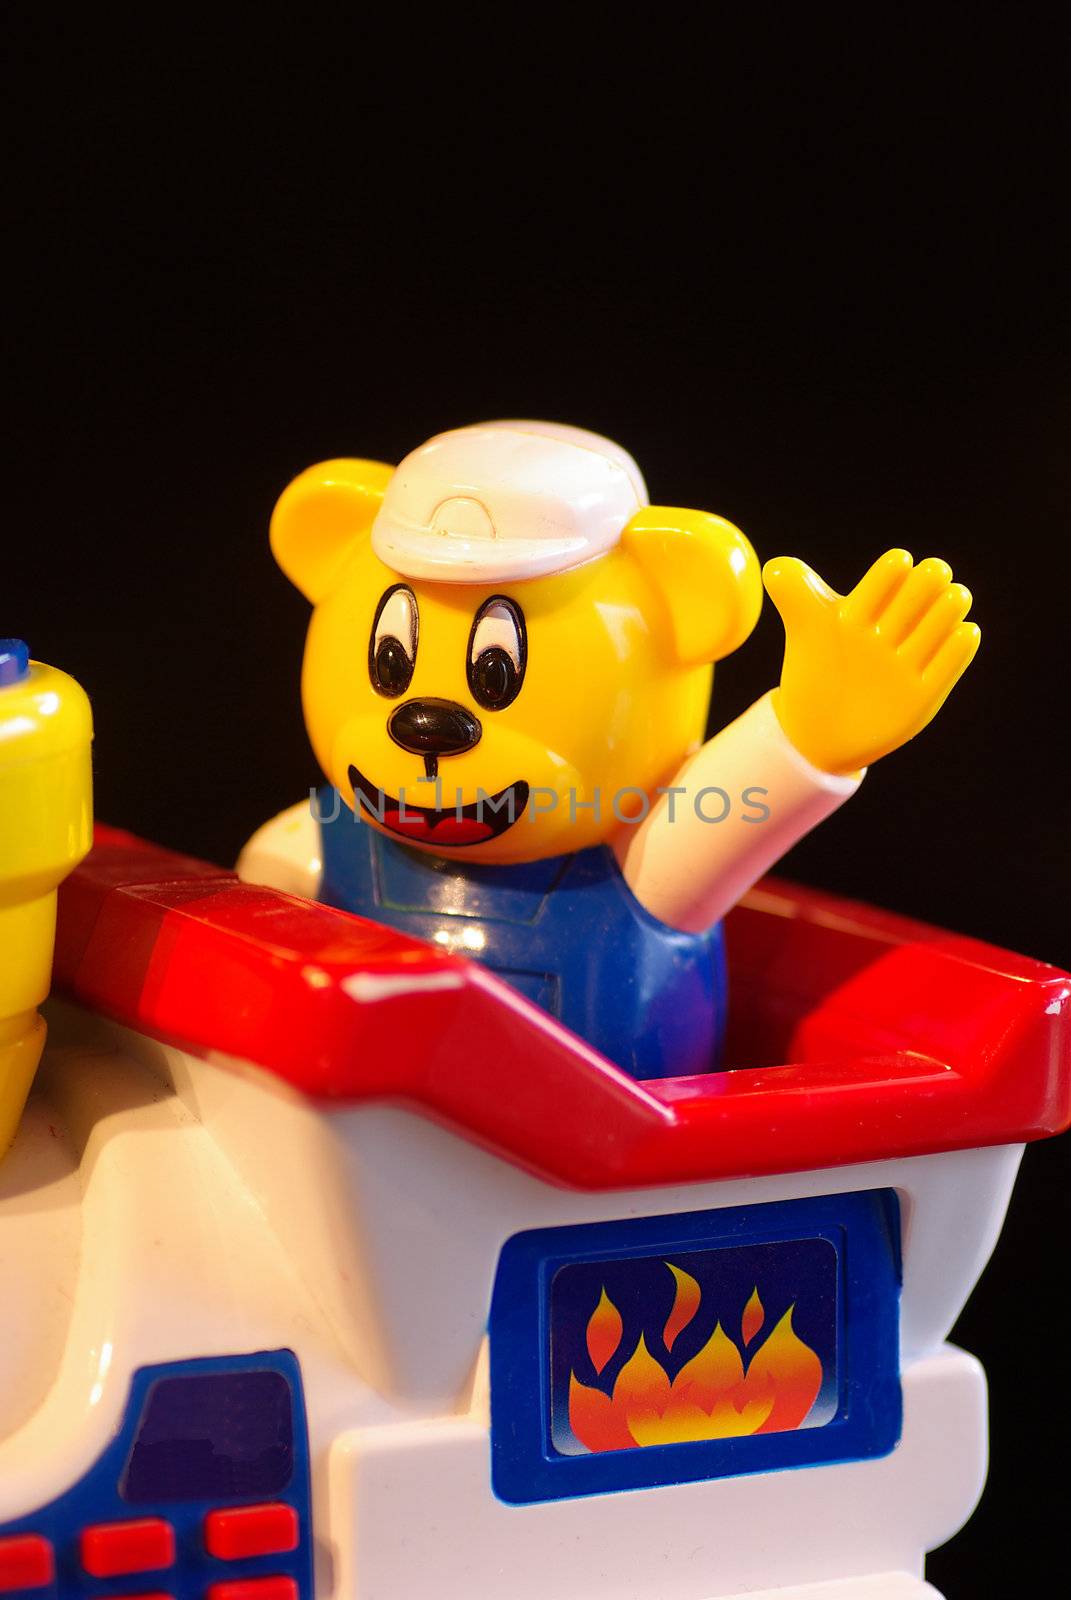 Childrens toy, a yellow bear driving a train and waving